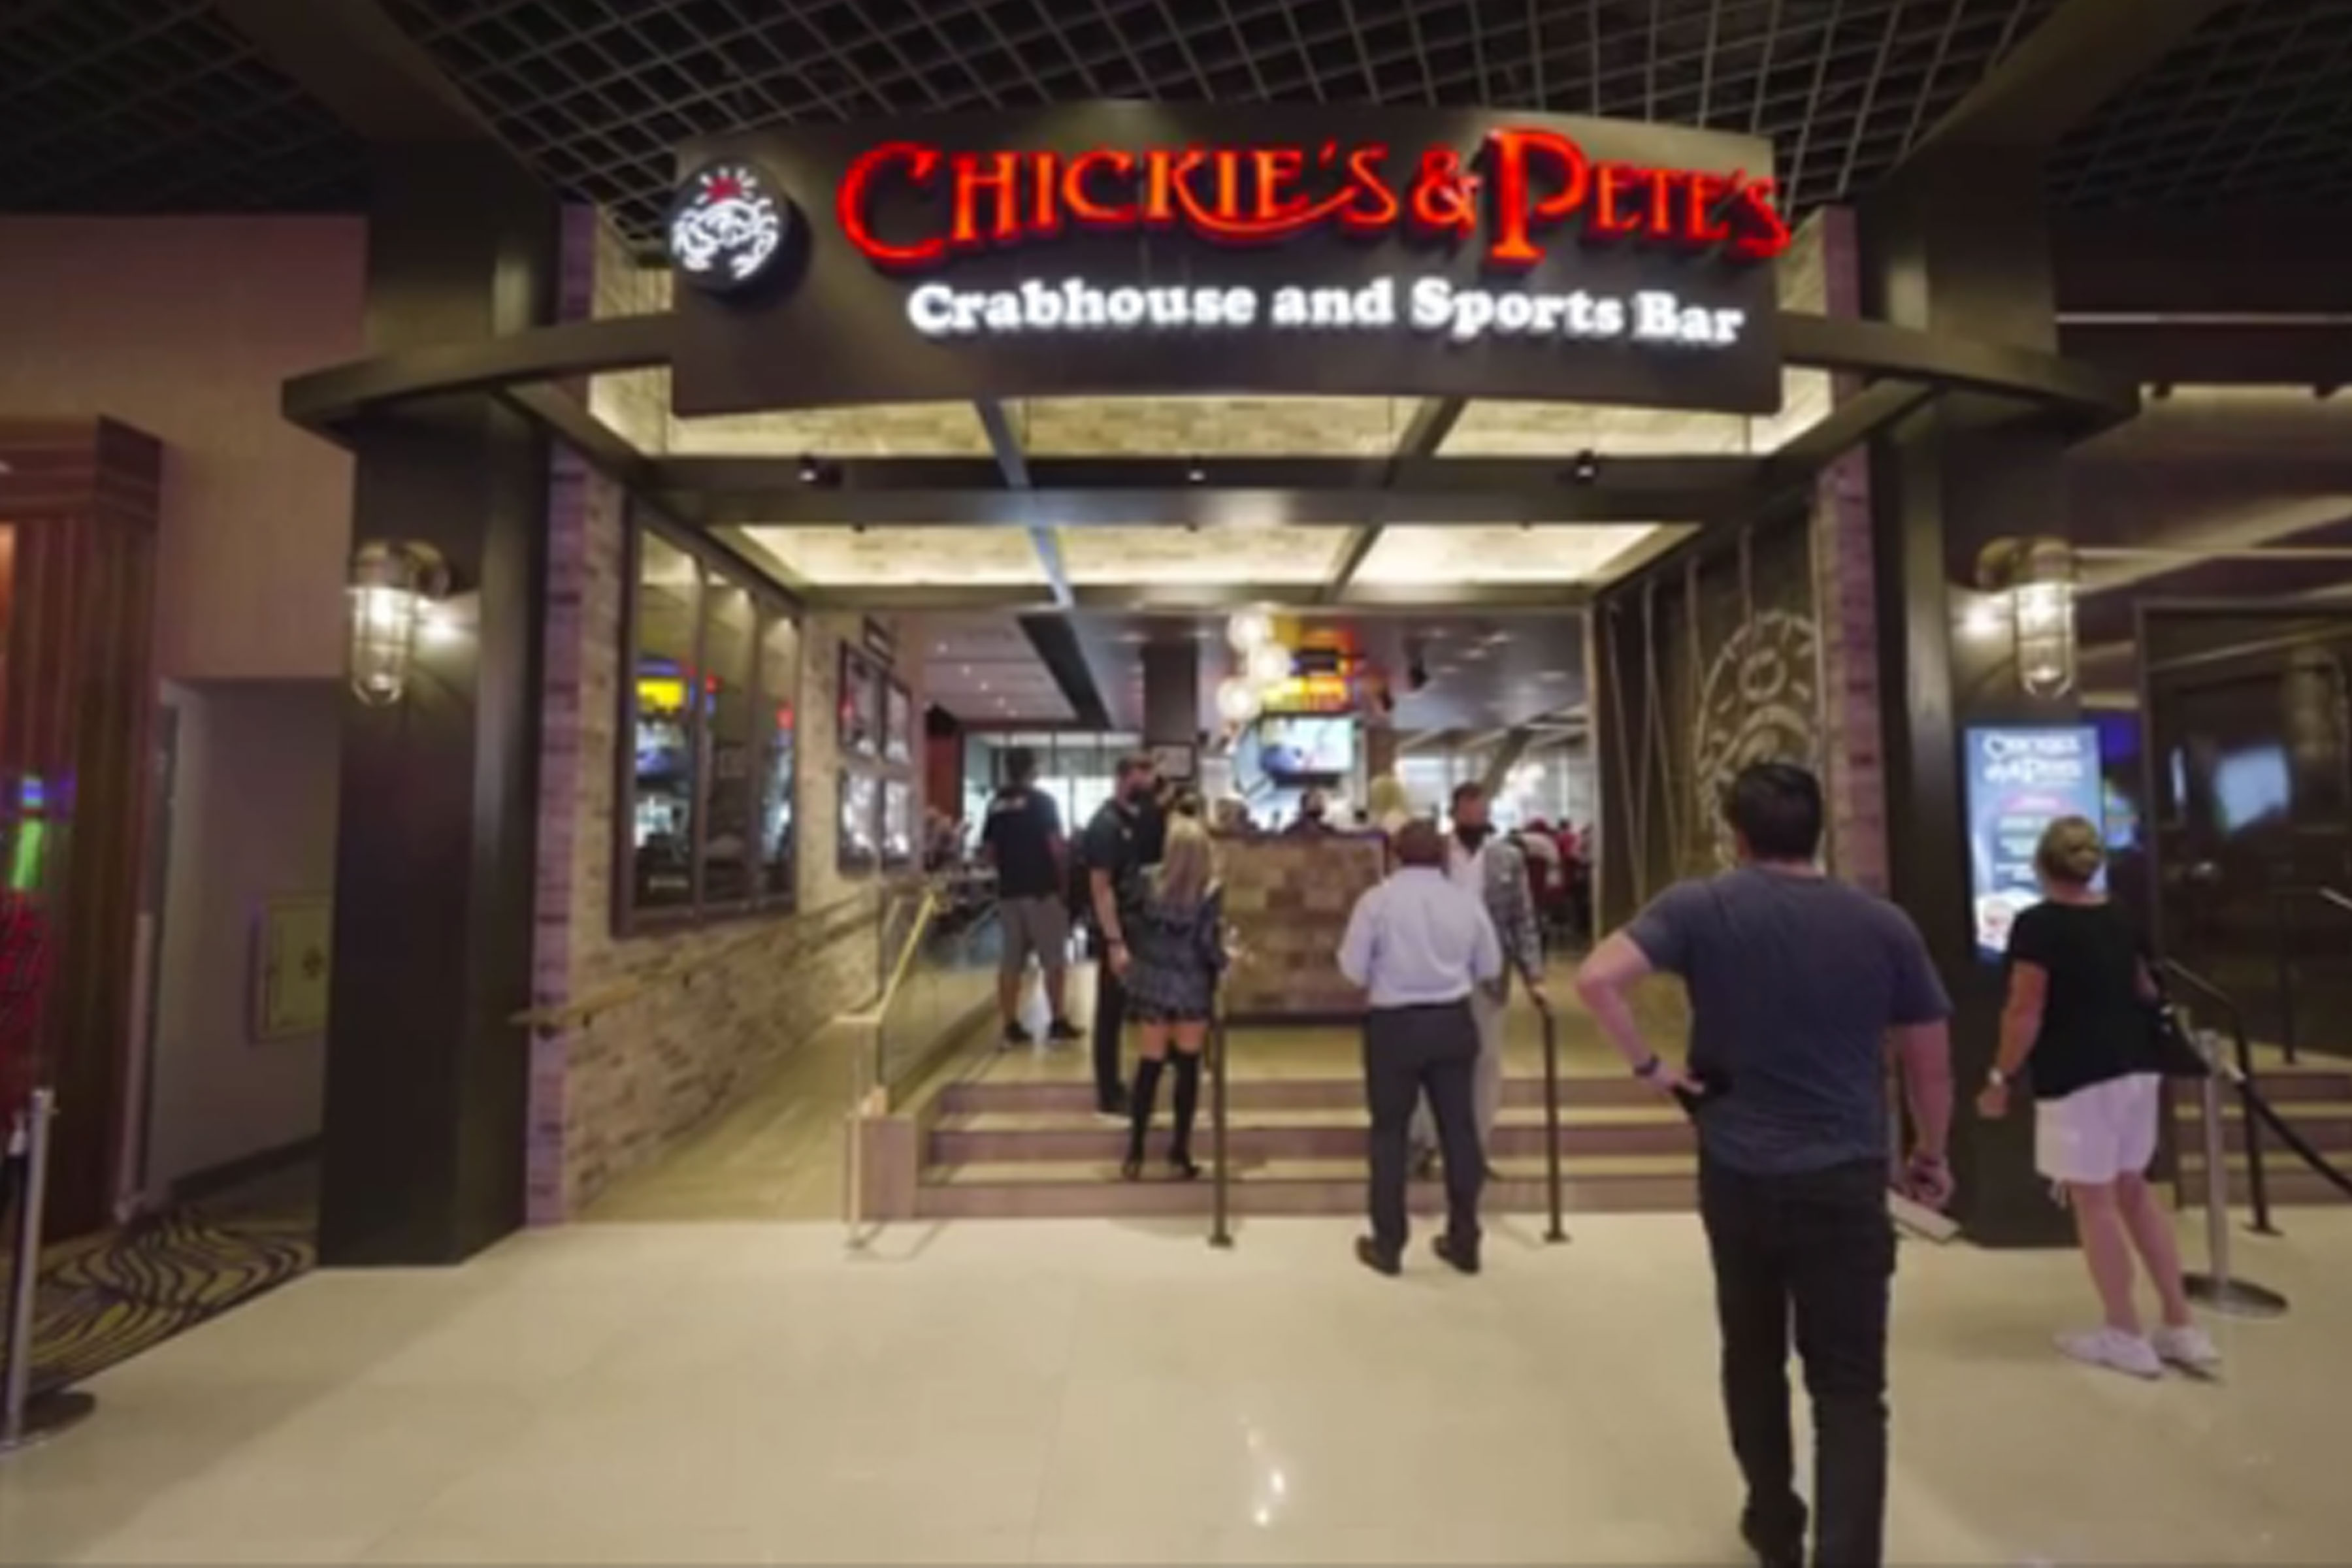 SAHARA Las Vegas celebrates the grand opening of Chickie’s & Pete’s Crab House and Sports Bar on October 21, 2021